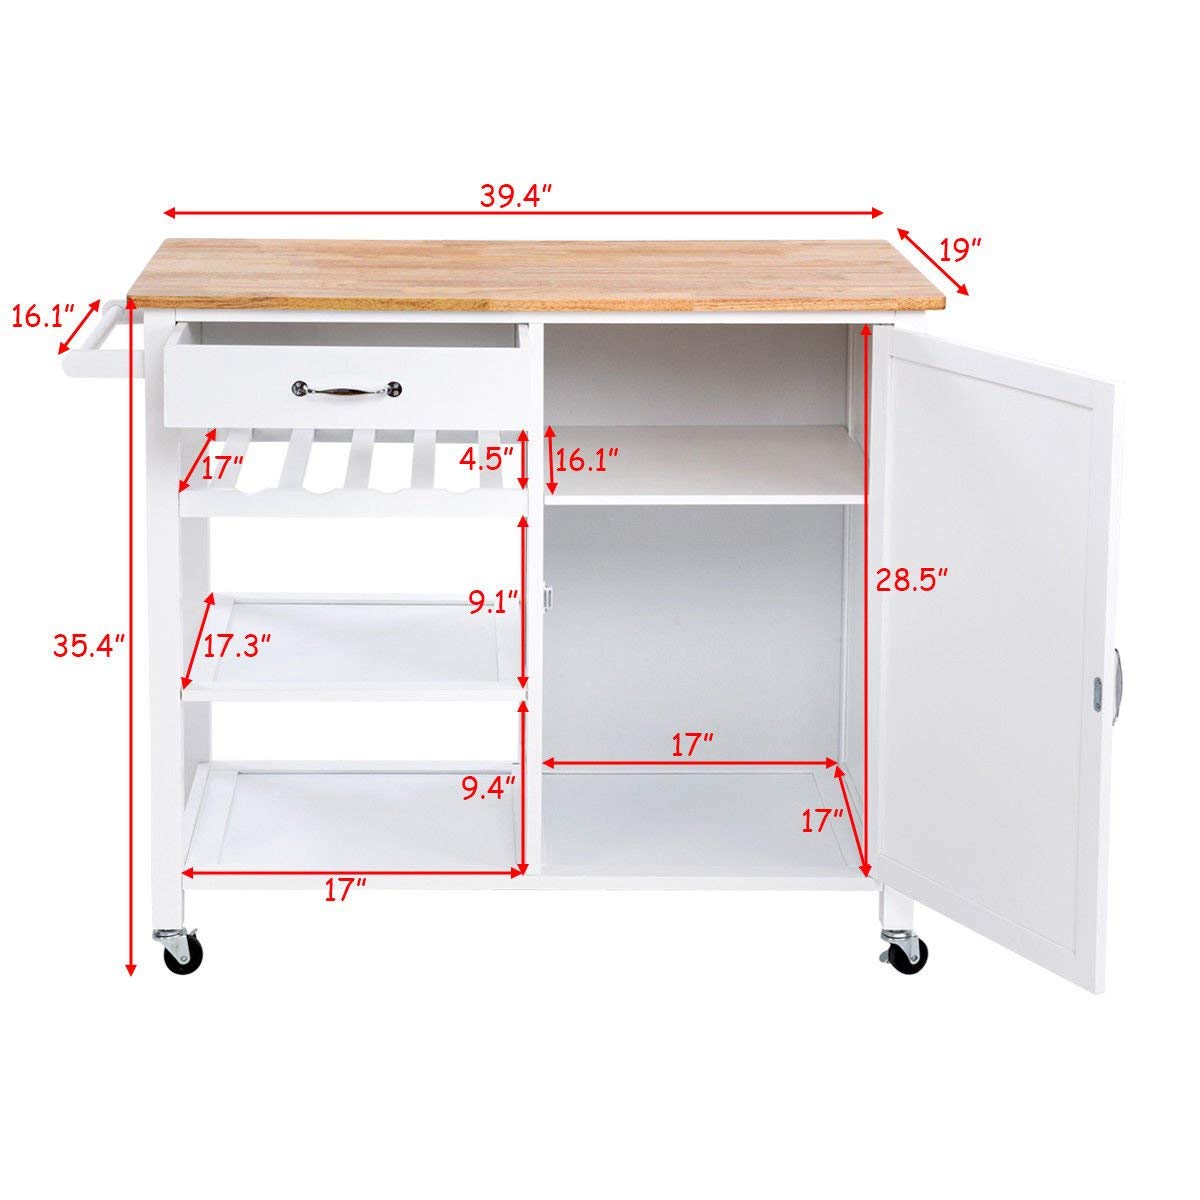 Wholesale Customized Mobile Moving Kitchen Wood Carts with 4 Wheel